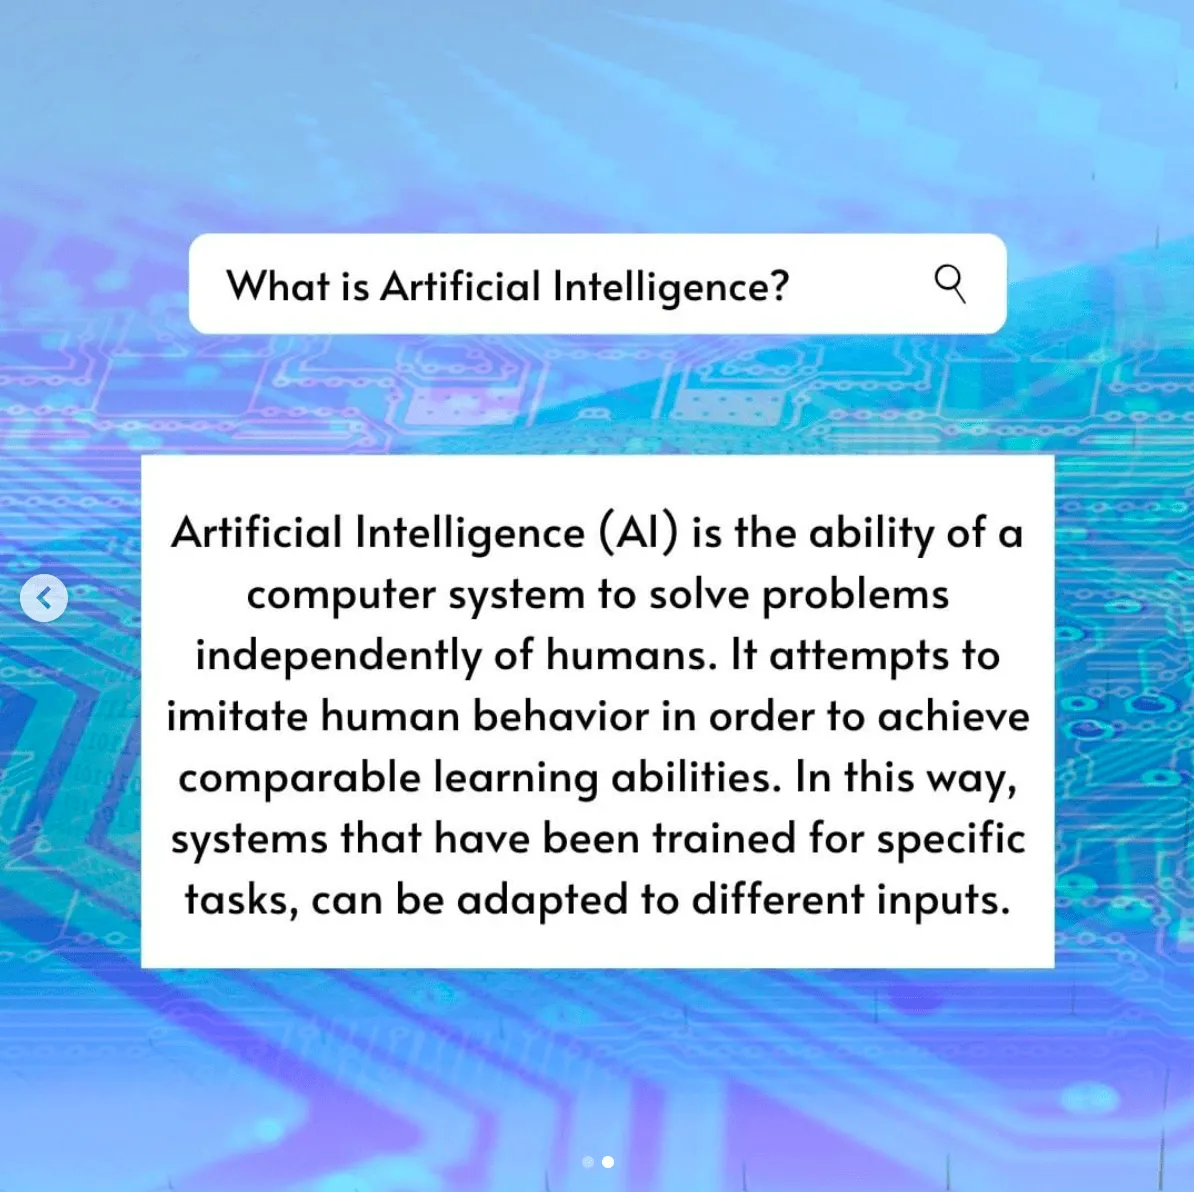 A search bar with an answer. What is Artificial Intelligence? Artificial Intelligence (AI) is the ability of a computer system to solve problems independently of humans. It attempts to imitate human behavior in order to achieve comparable learning abilities. In this way, systems that have been trained for specific tasks, can be adapted to different inputs.